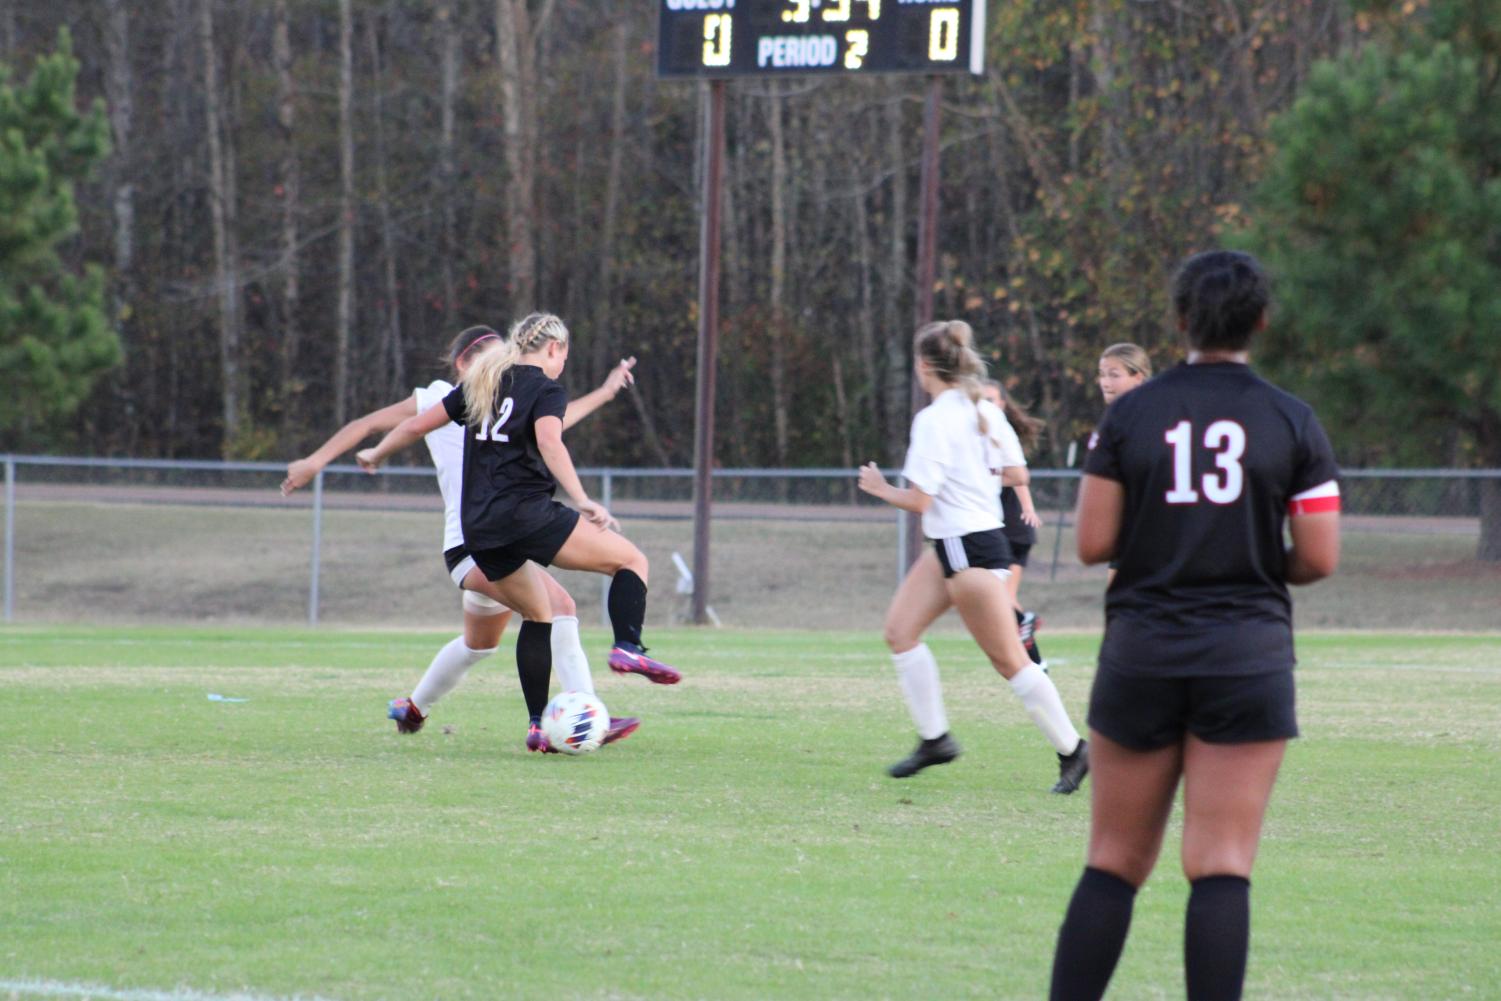 Lady+Mustangs+Soccer+drop+match+to+New+Albany+0-1+%7C+Slideshow